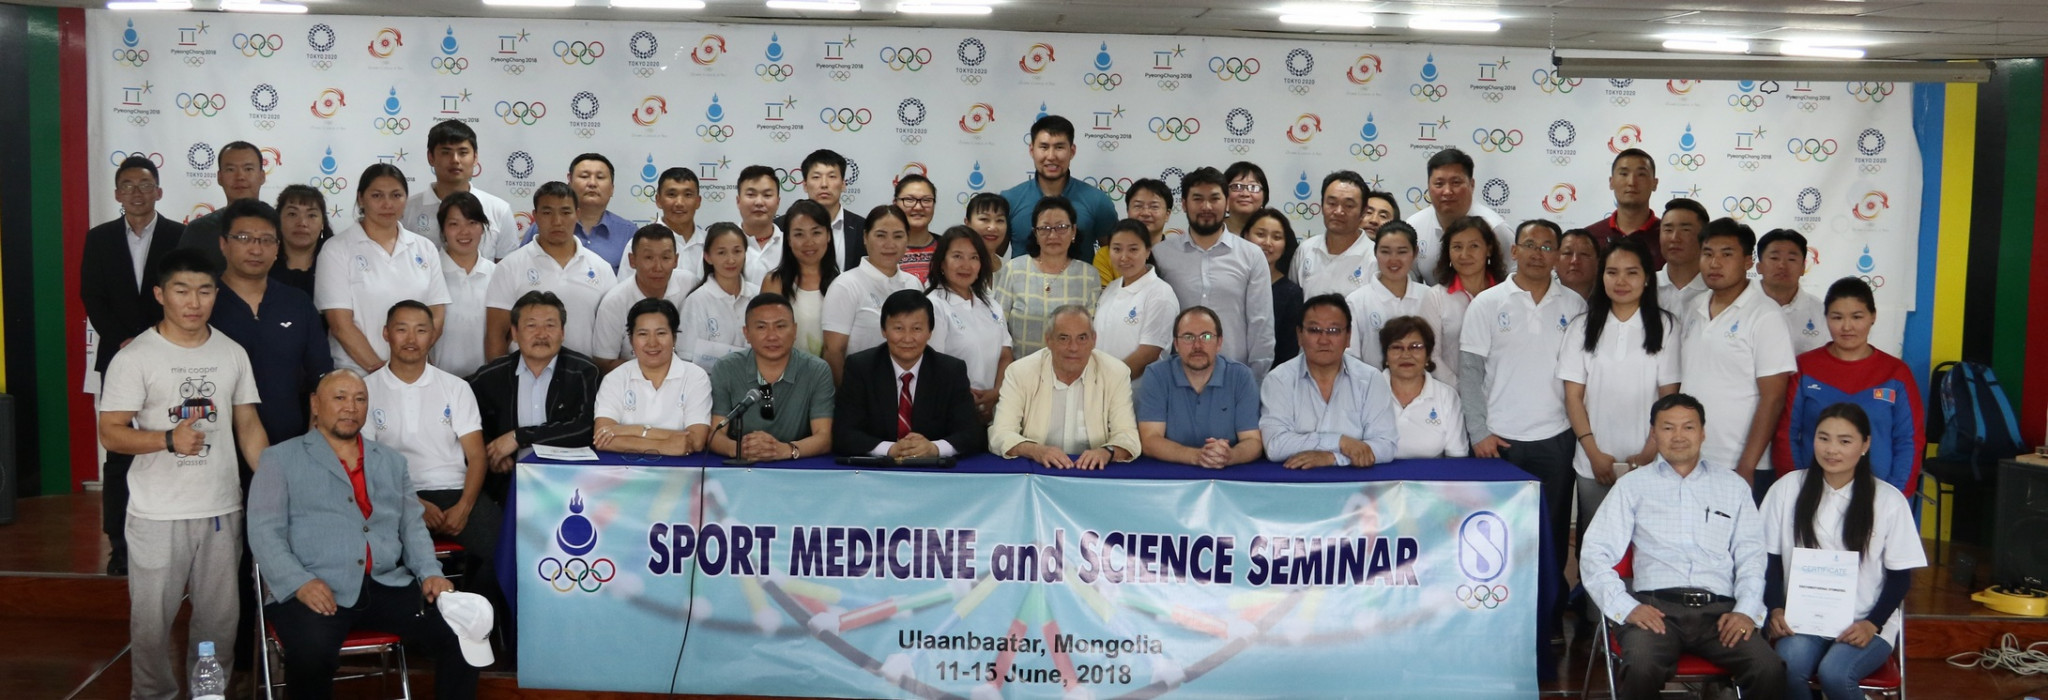 Mongolia hosts sports science seminar with help from Olympic Solidarity Commission